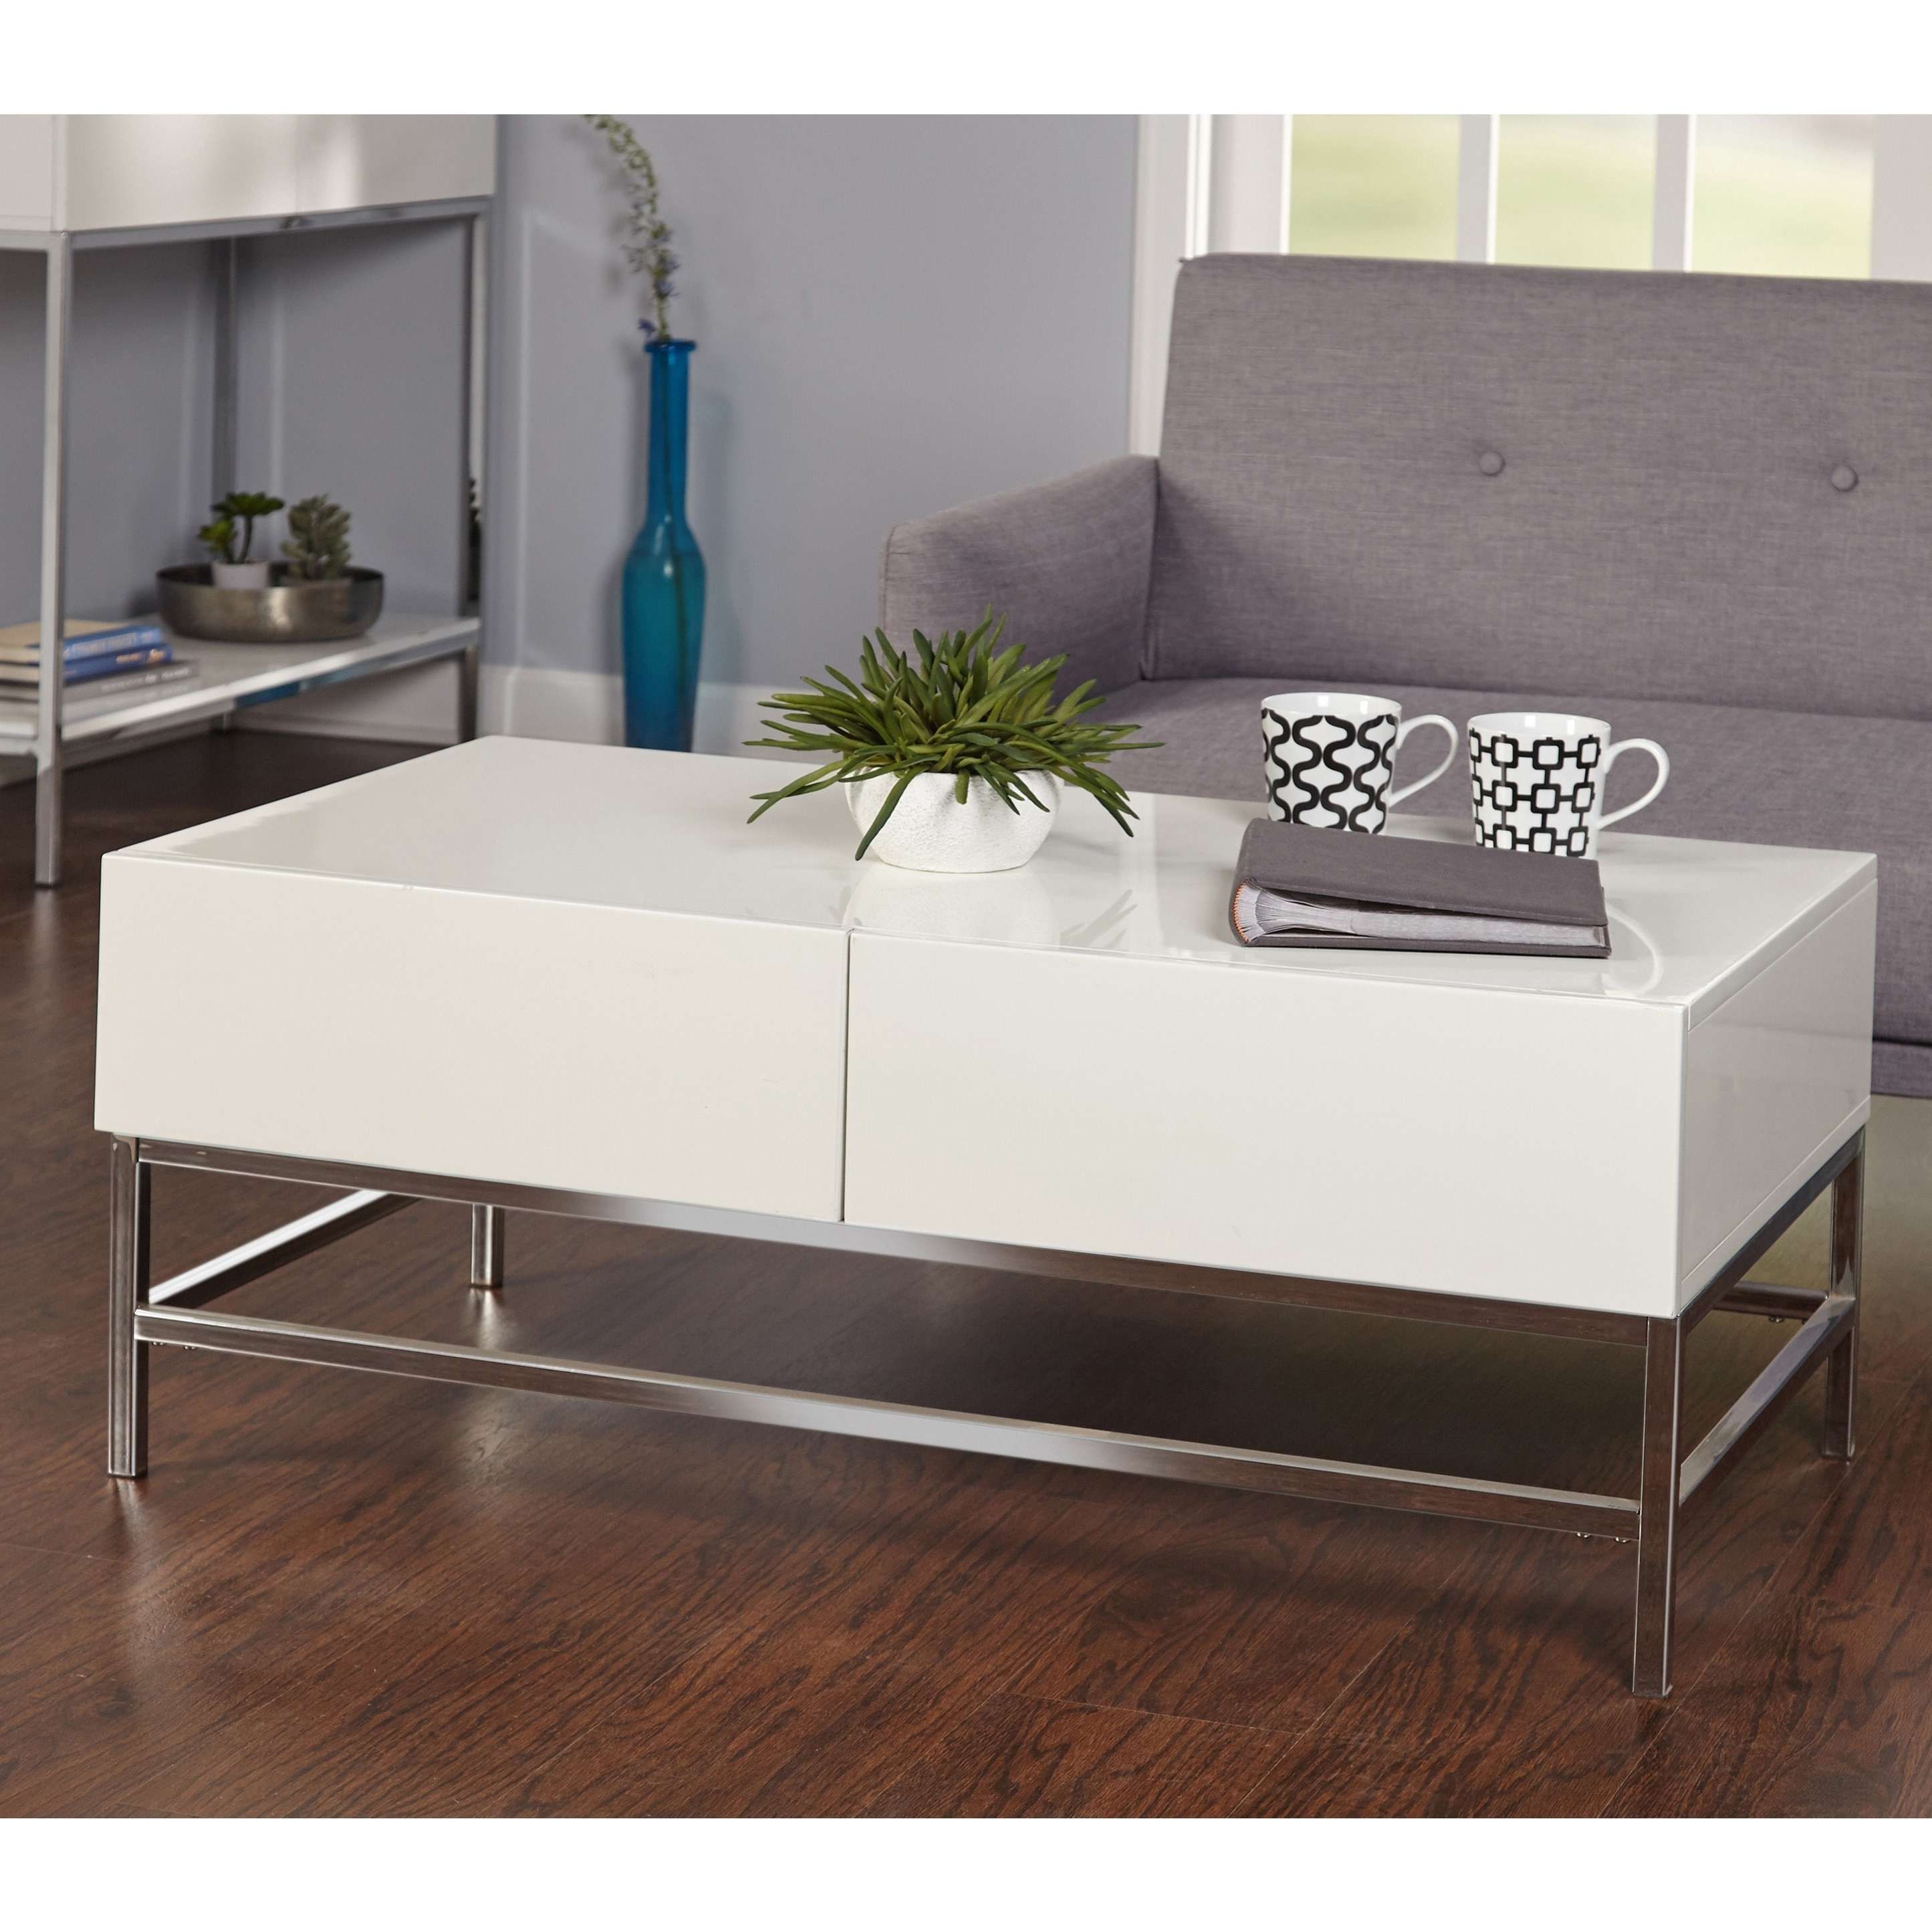 Best And Newest High Gloss Coffee Tables Within Simple Living White Metal High Gloss Coffee Table – Free Shipping (View 1 of 20)